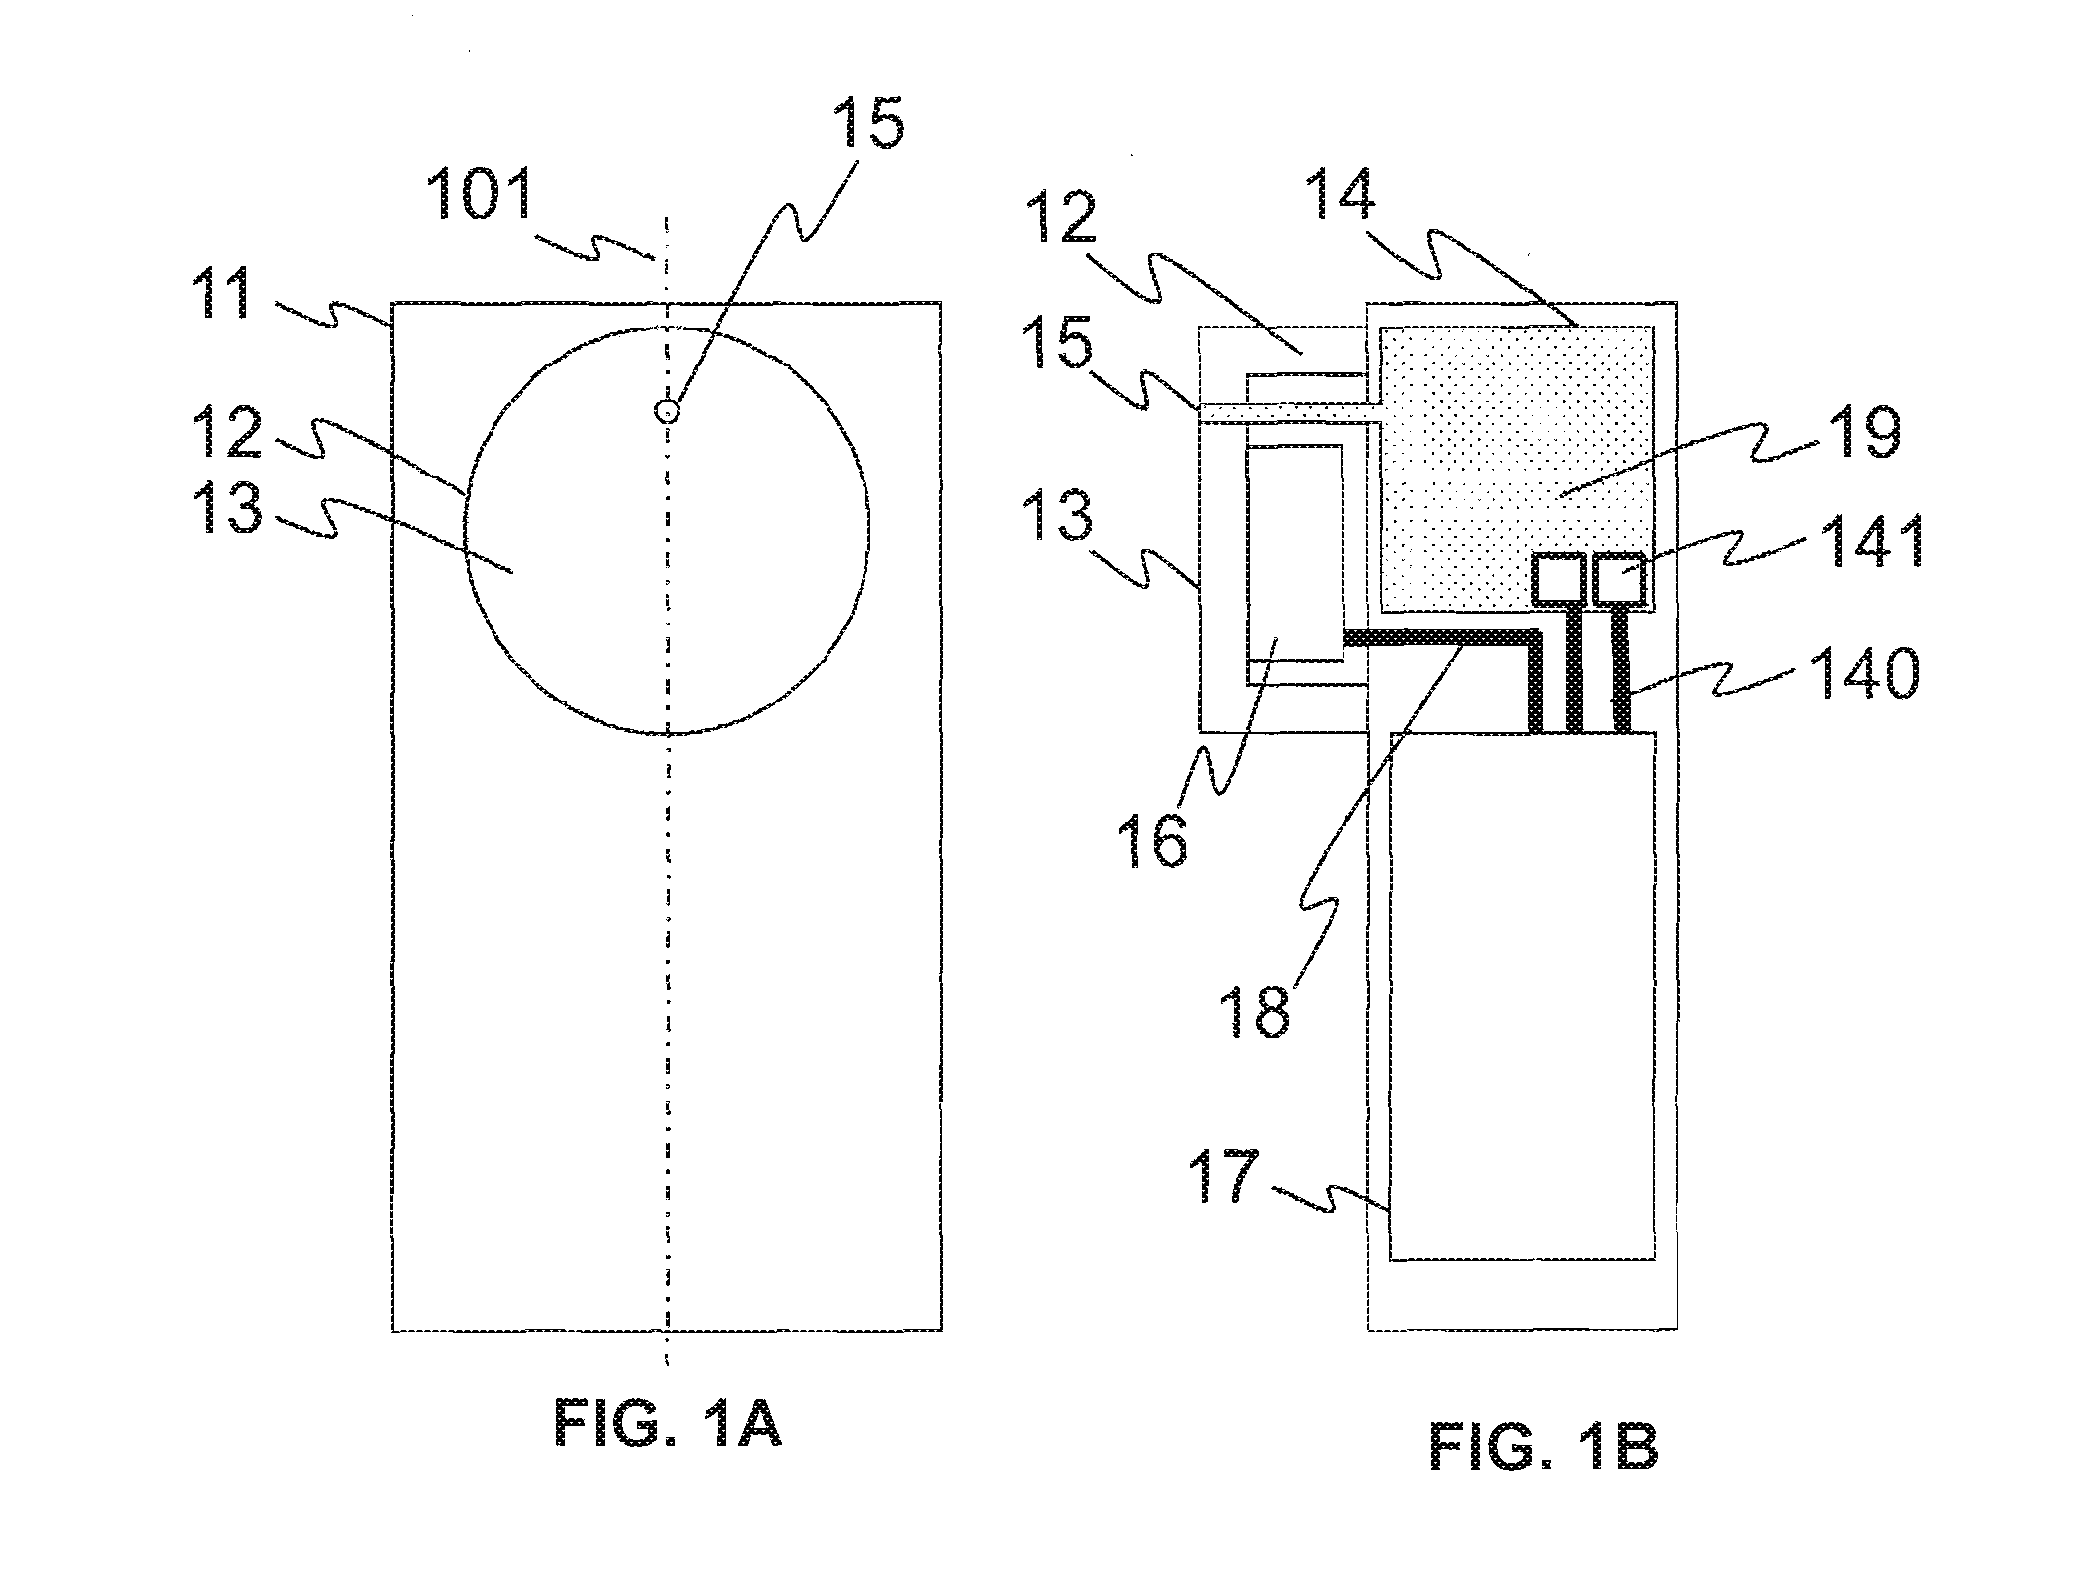 Skin treatment device with an integrated specimen dispenser